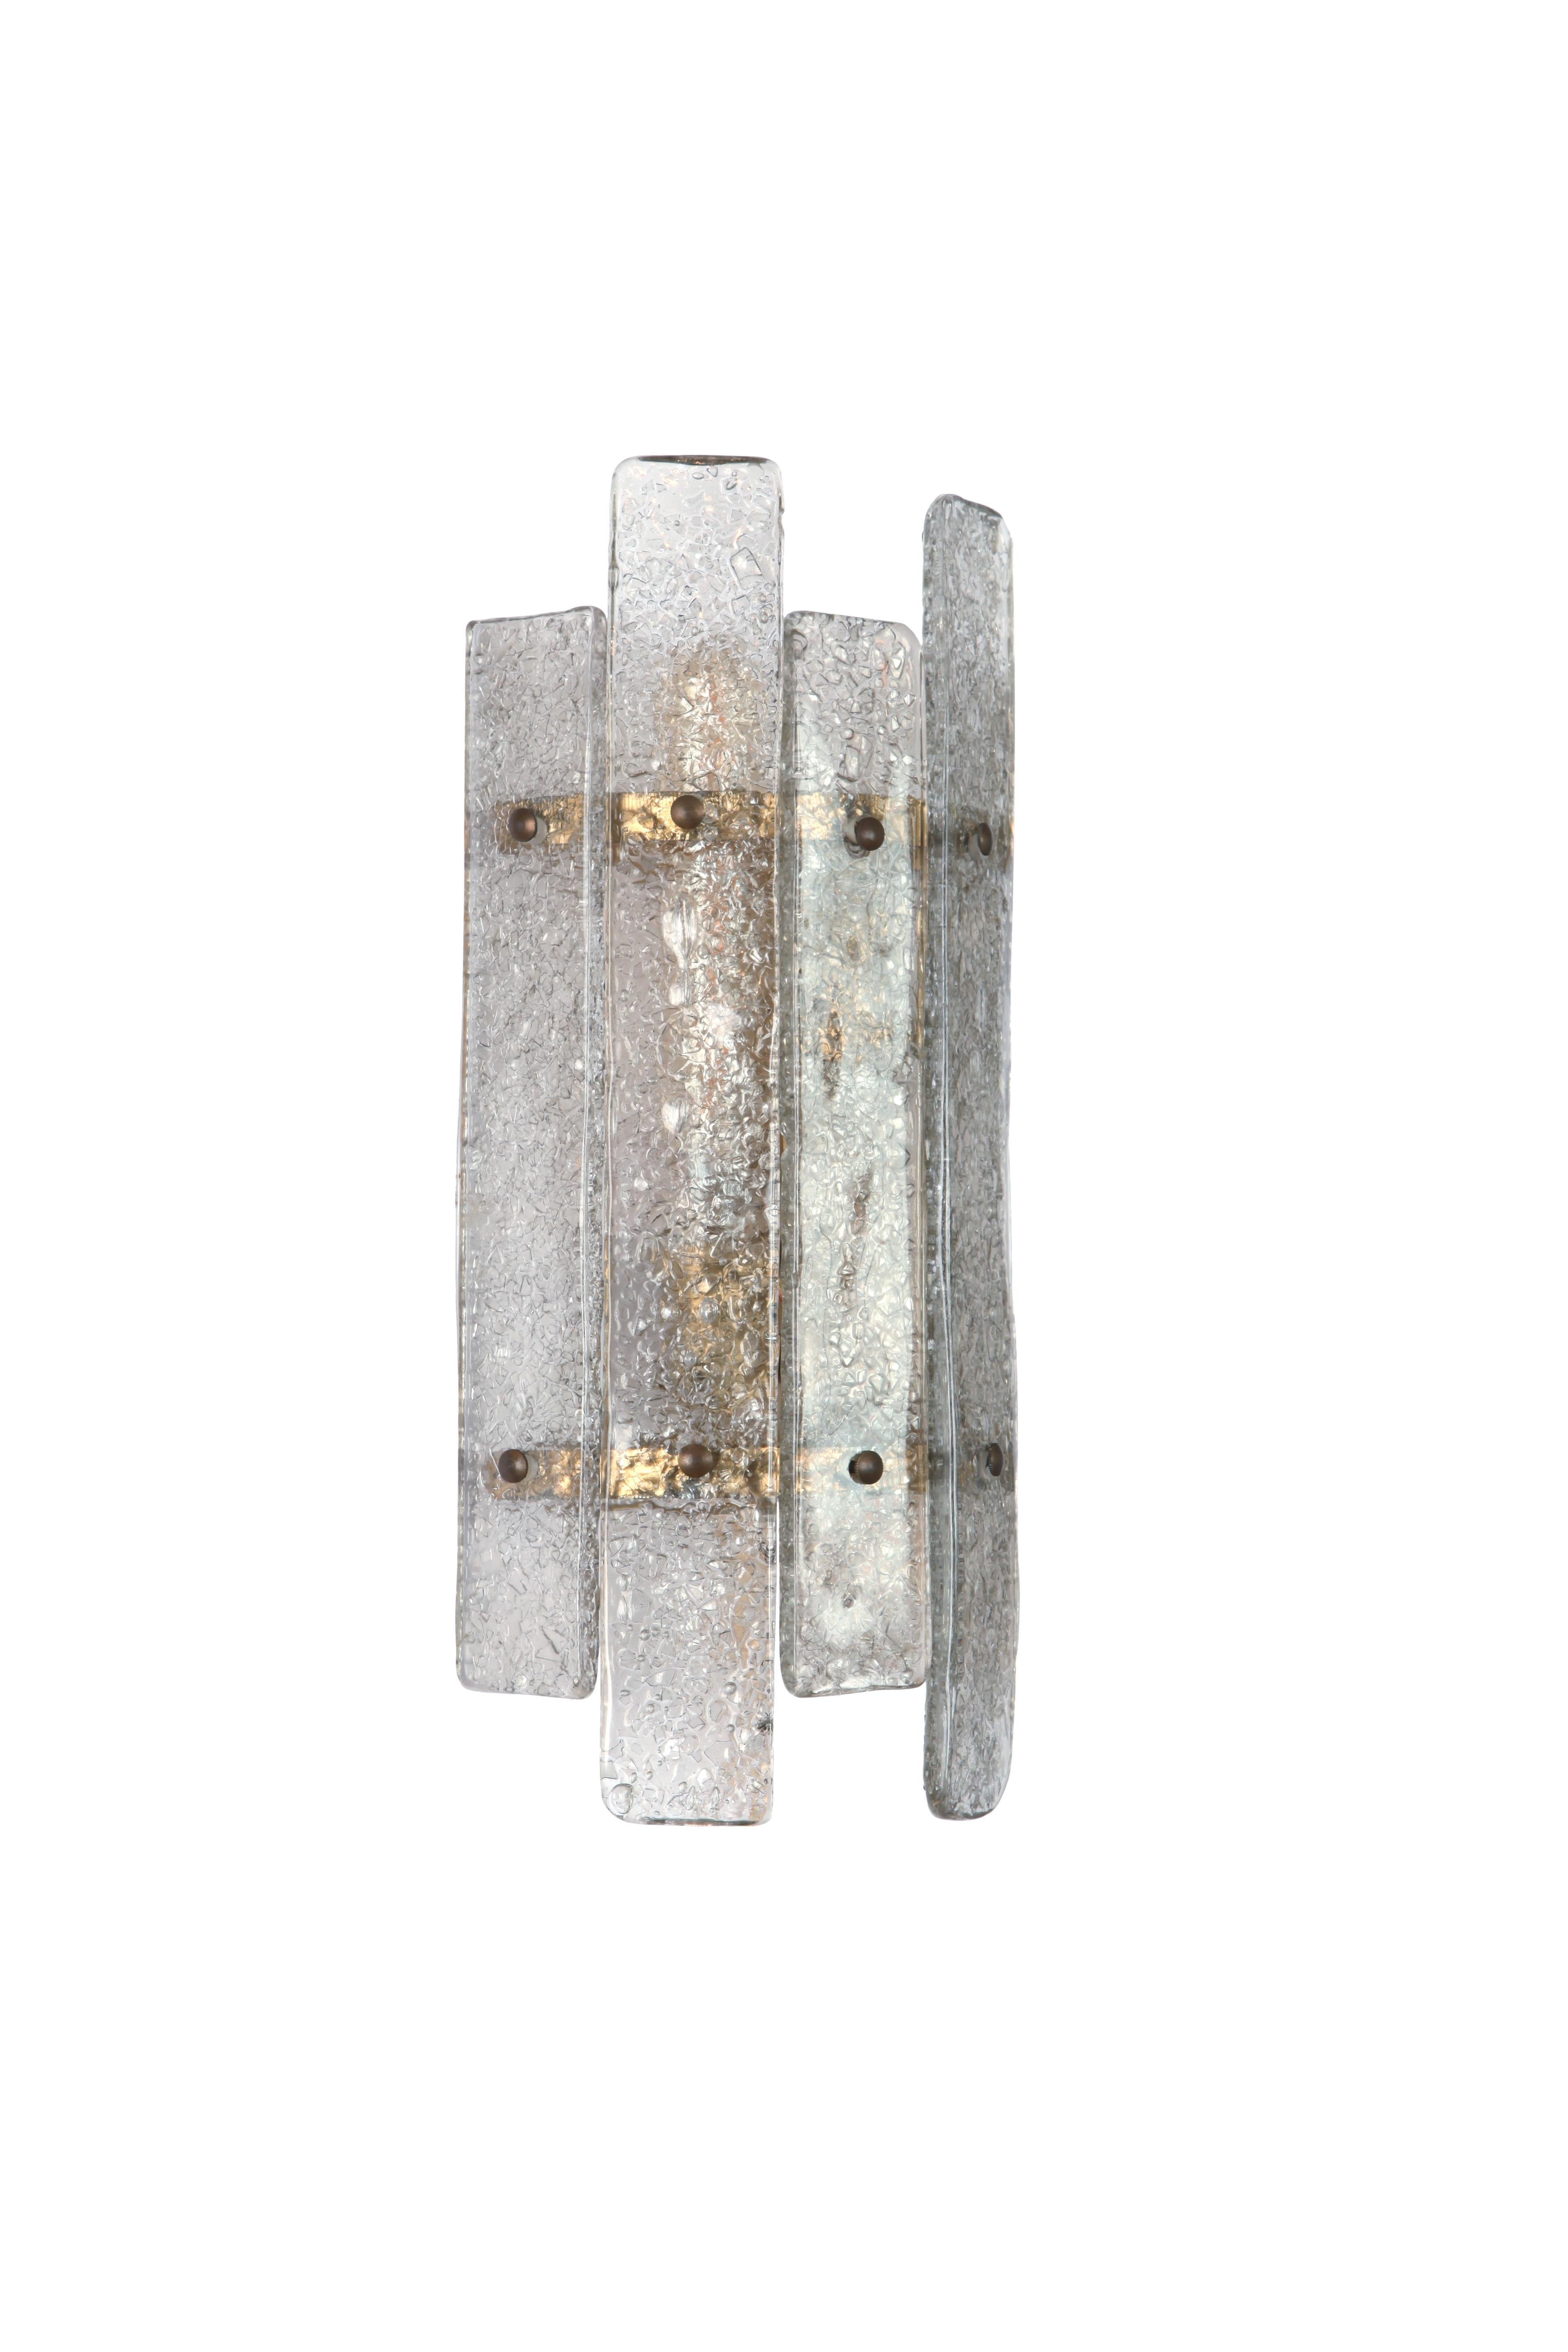 Wall sconces from Italy with textured Murano glass panels. Tiny pieces of glass were fused to the glass panels which refract the light when it shines through. The glass has a light smoke colour to it.

Brass frame with aged brass screws.

Wired for